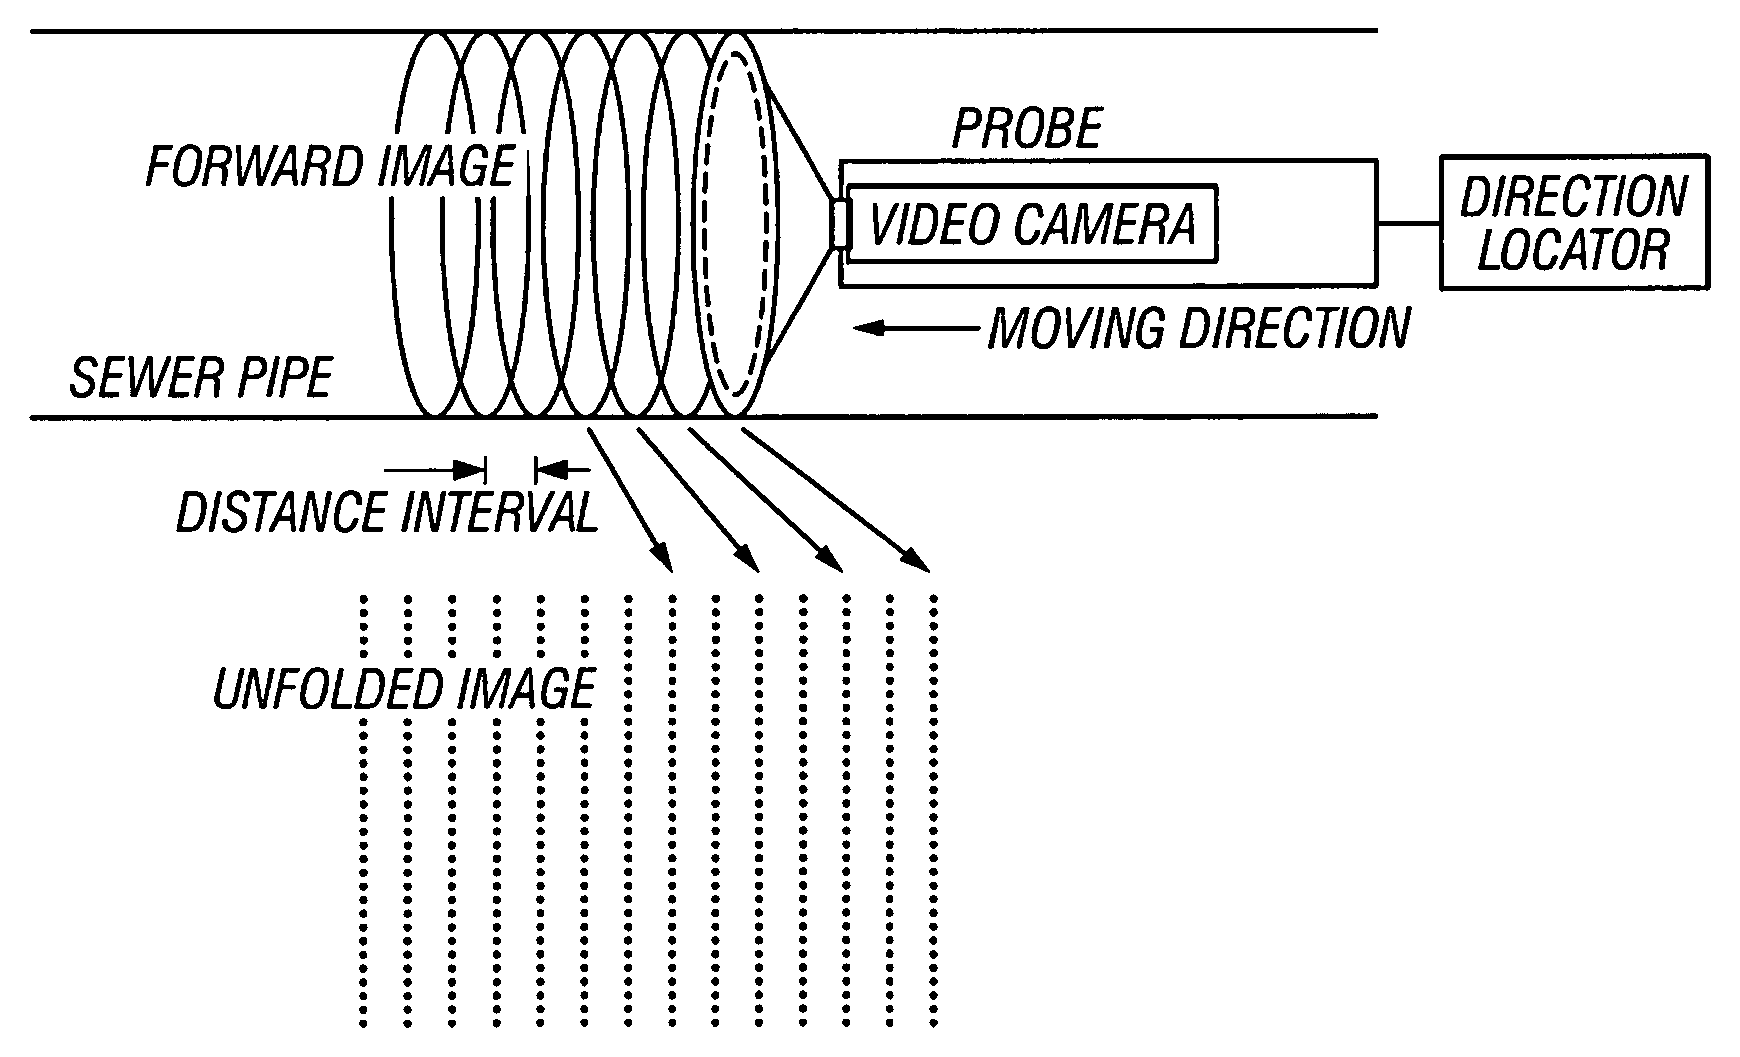 Apparatus and method for detecting pipeline defects